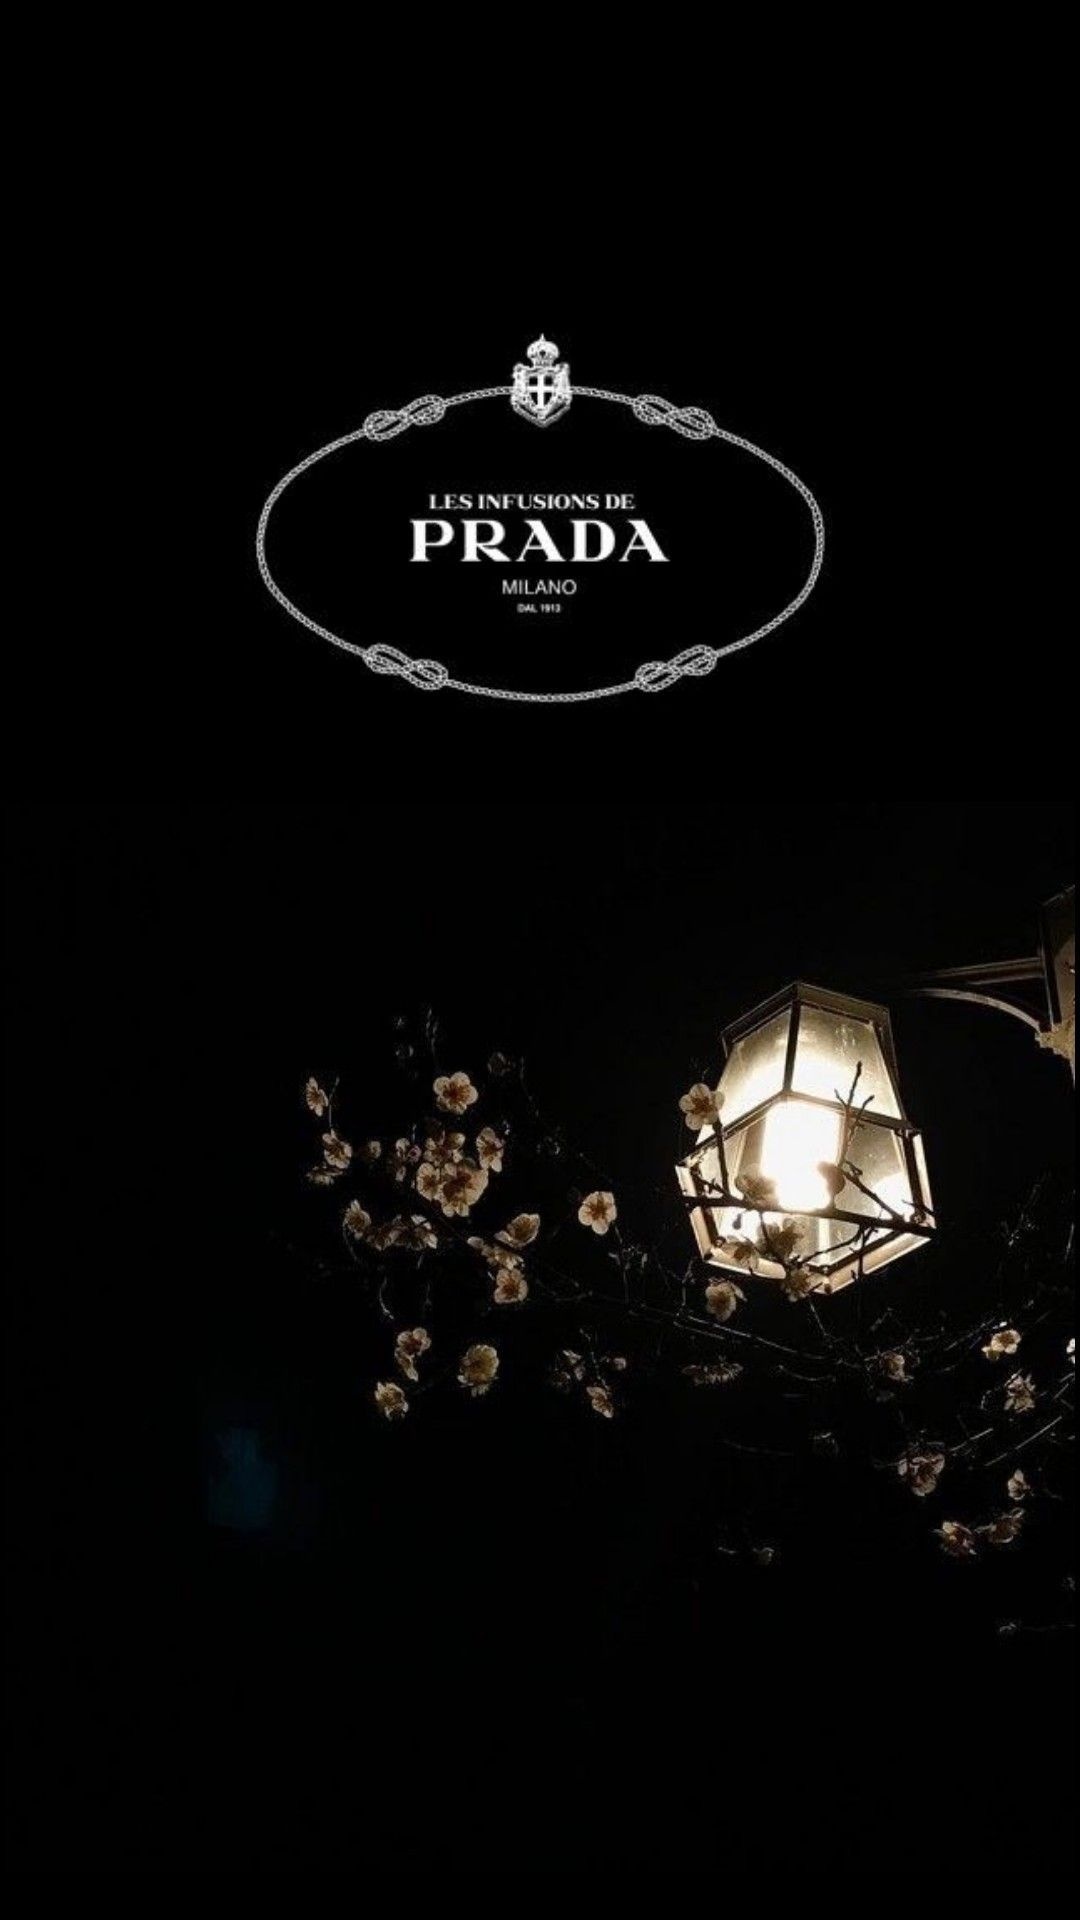 Prada: A family owned holding comprising the 100-year-old brand, Luxury goods and accessories. 1080x1920 Full HD Background.